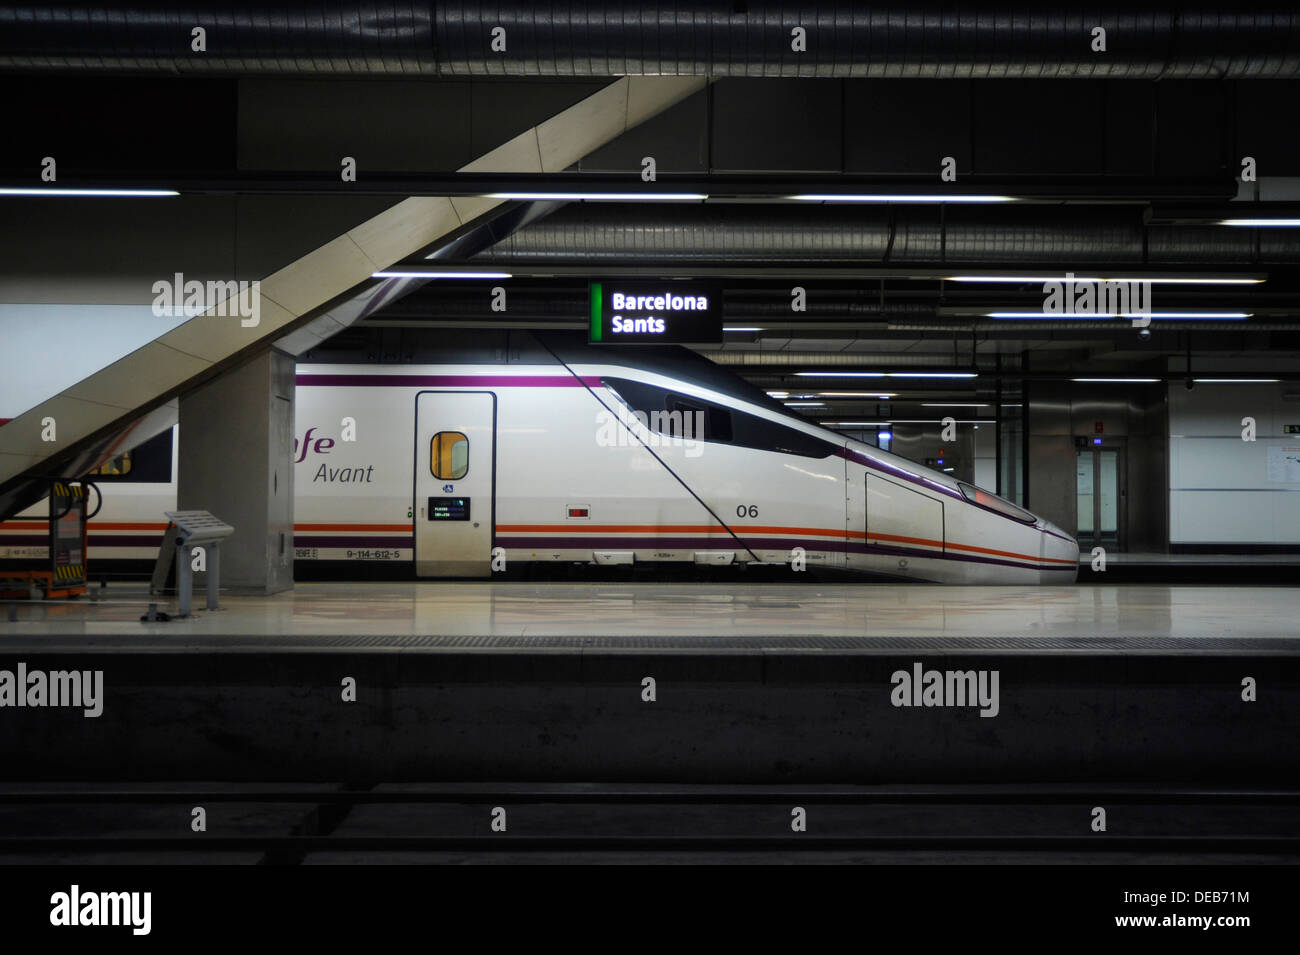 A high-speed renfe train in the Barcelona Sants train station. Stock Photo